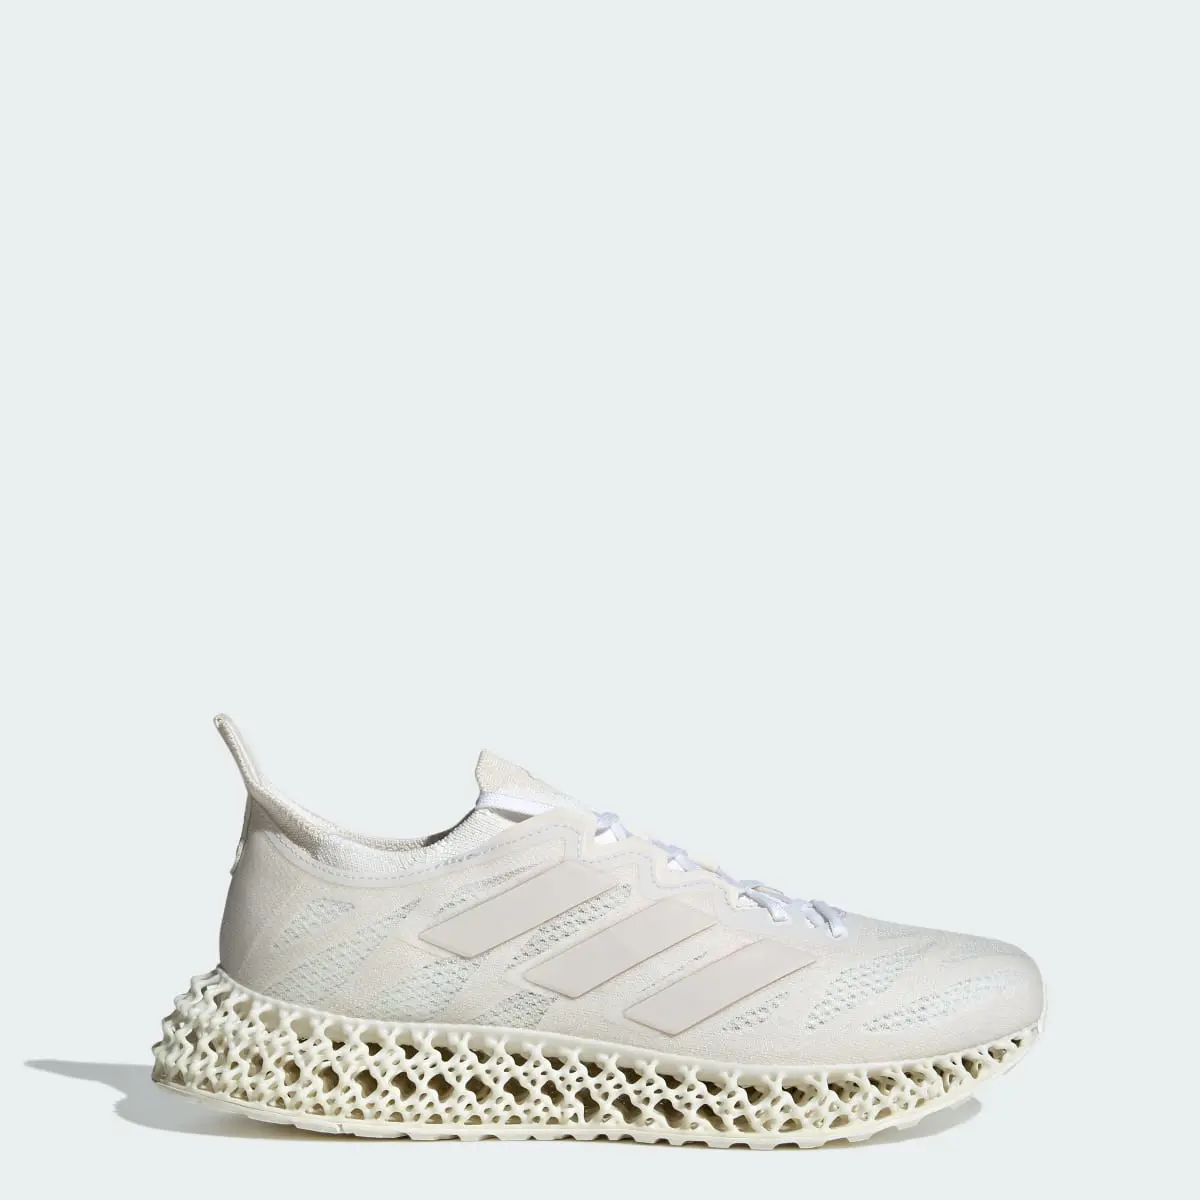 Adidas 4DFWD 3 Running Shoes. 1